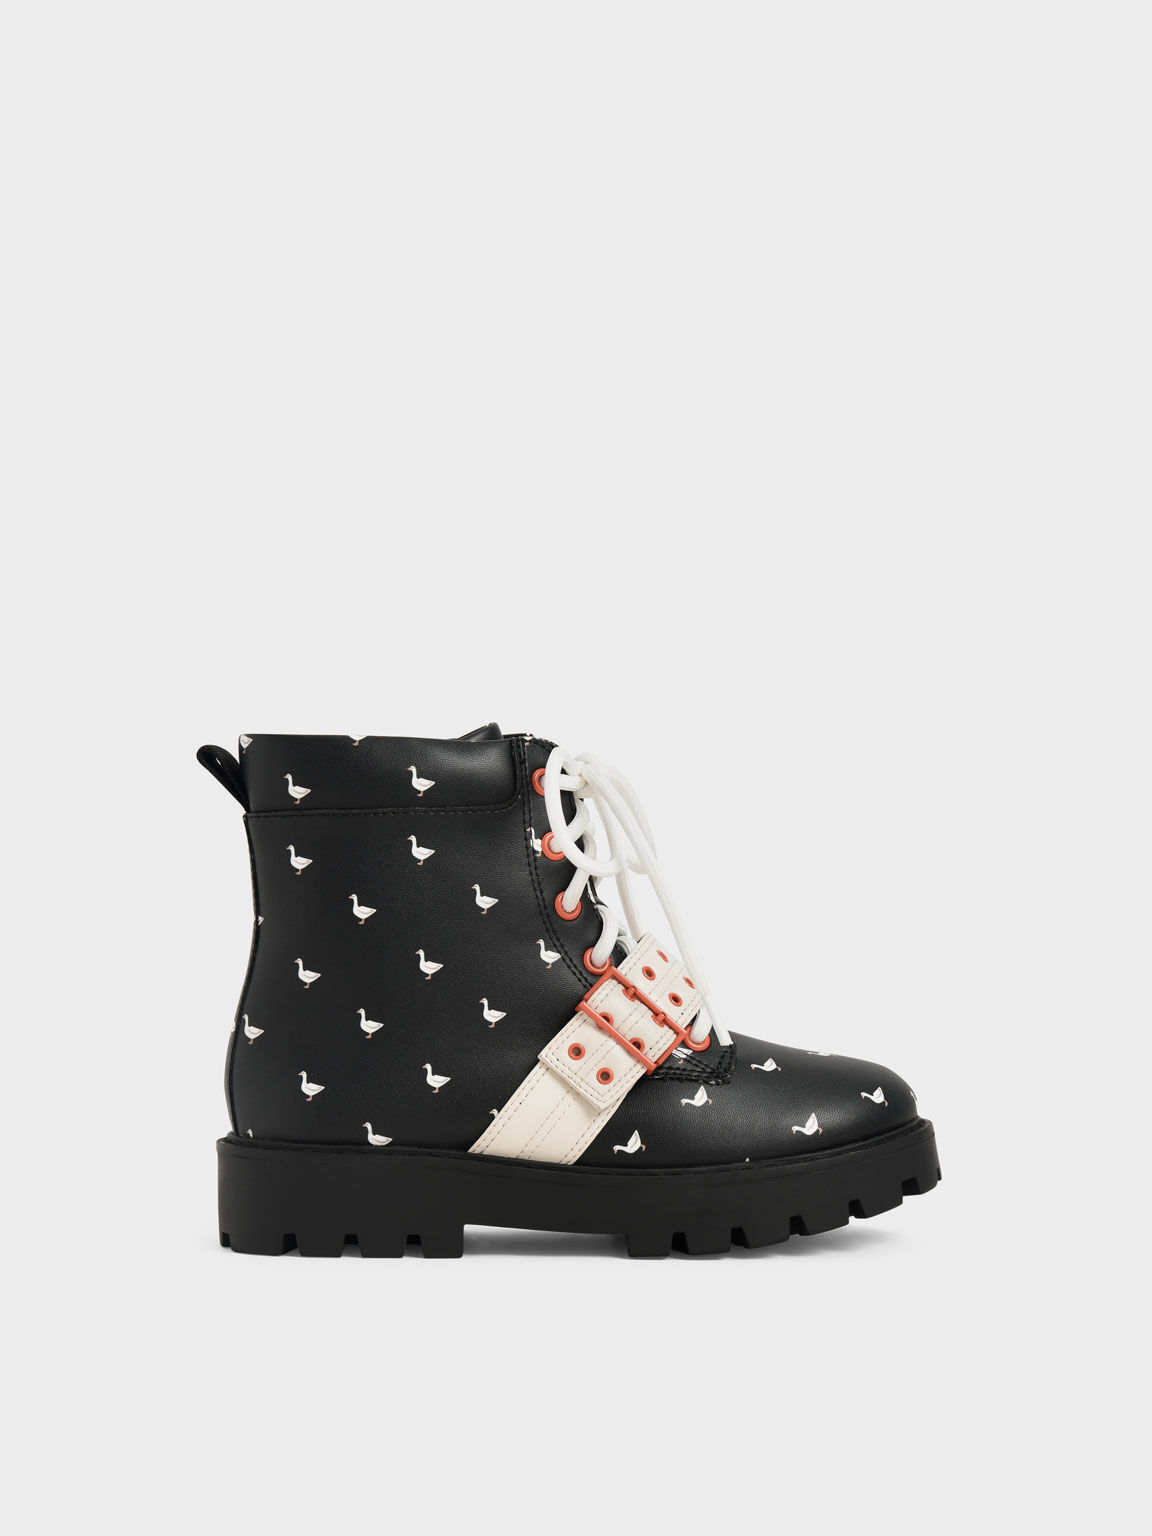 Girls' Printed Lace-Up Ankle Boots, Black Satin, hi-res